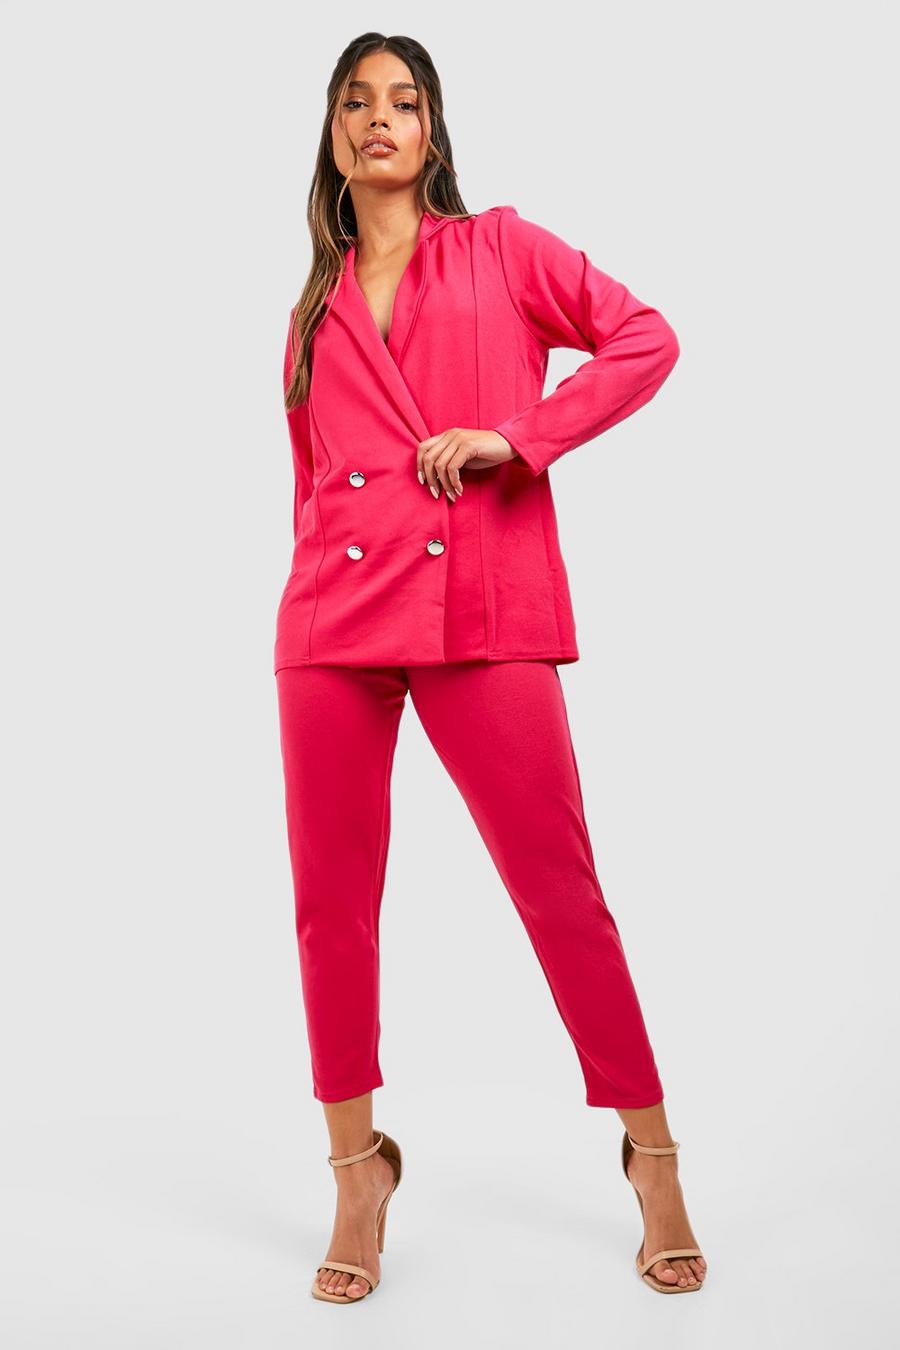 Hot pink rosa Double Breasted Blazer And Trouser Suit Set